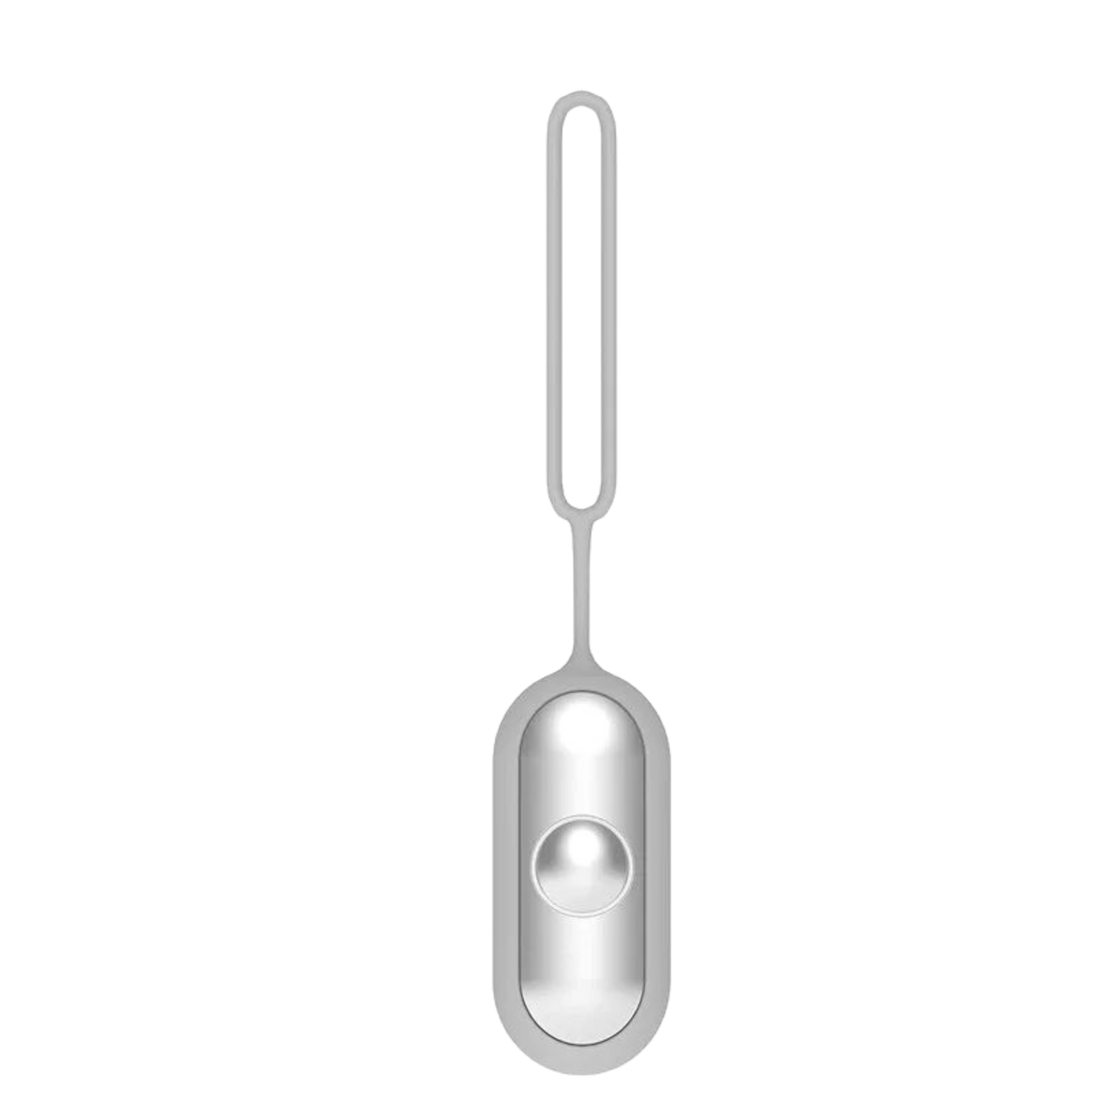 Silver Chill Pill hand blender attachment with a blending blade visible at the bottom, designed to improve sleep quality, set against a dark background.